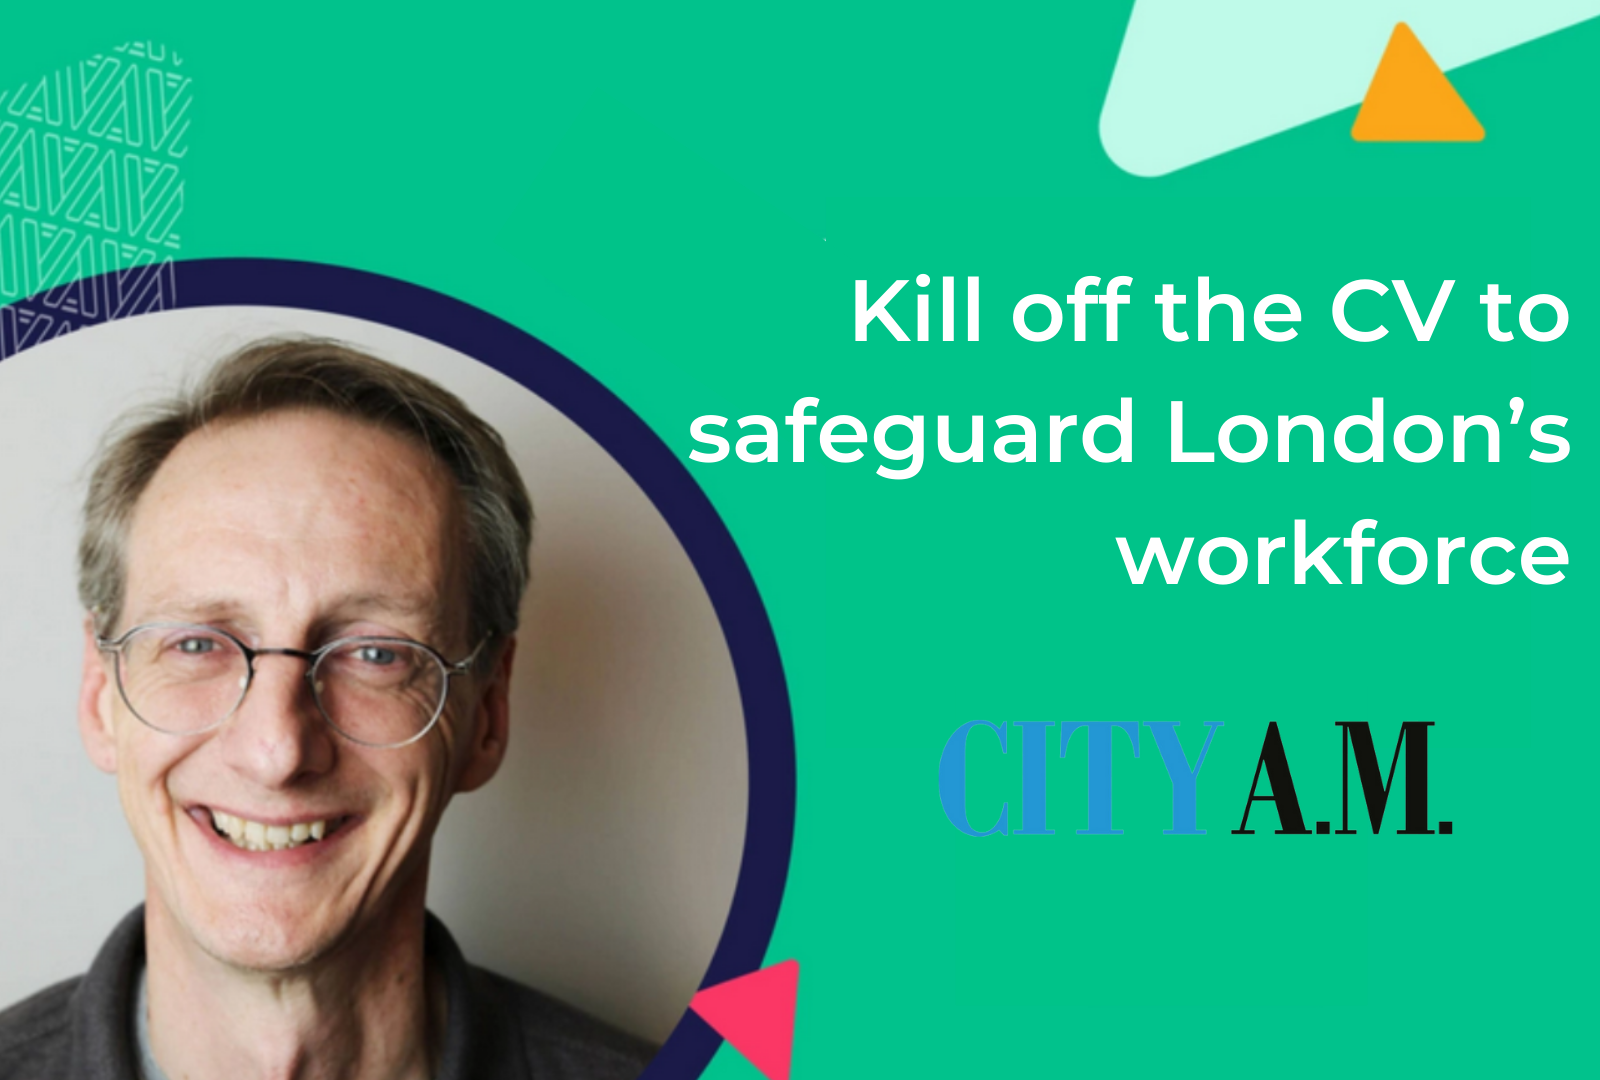 City AM: Kill off the CV to safeguard London’s workforce